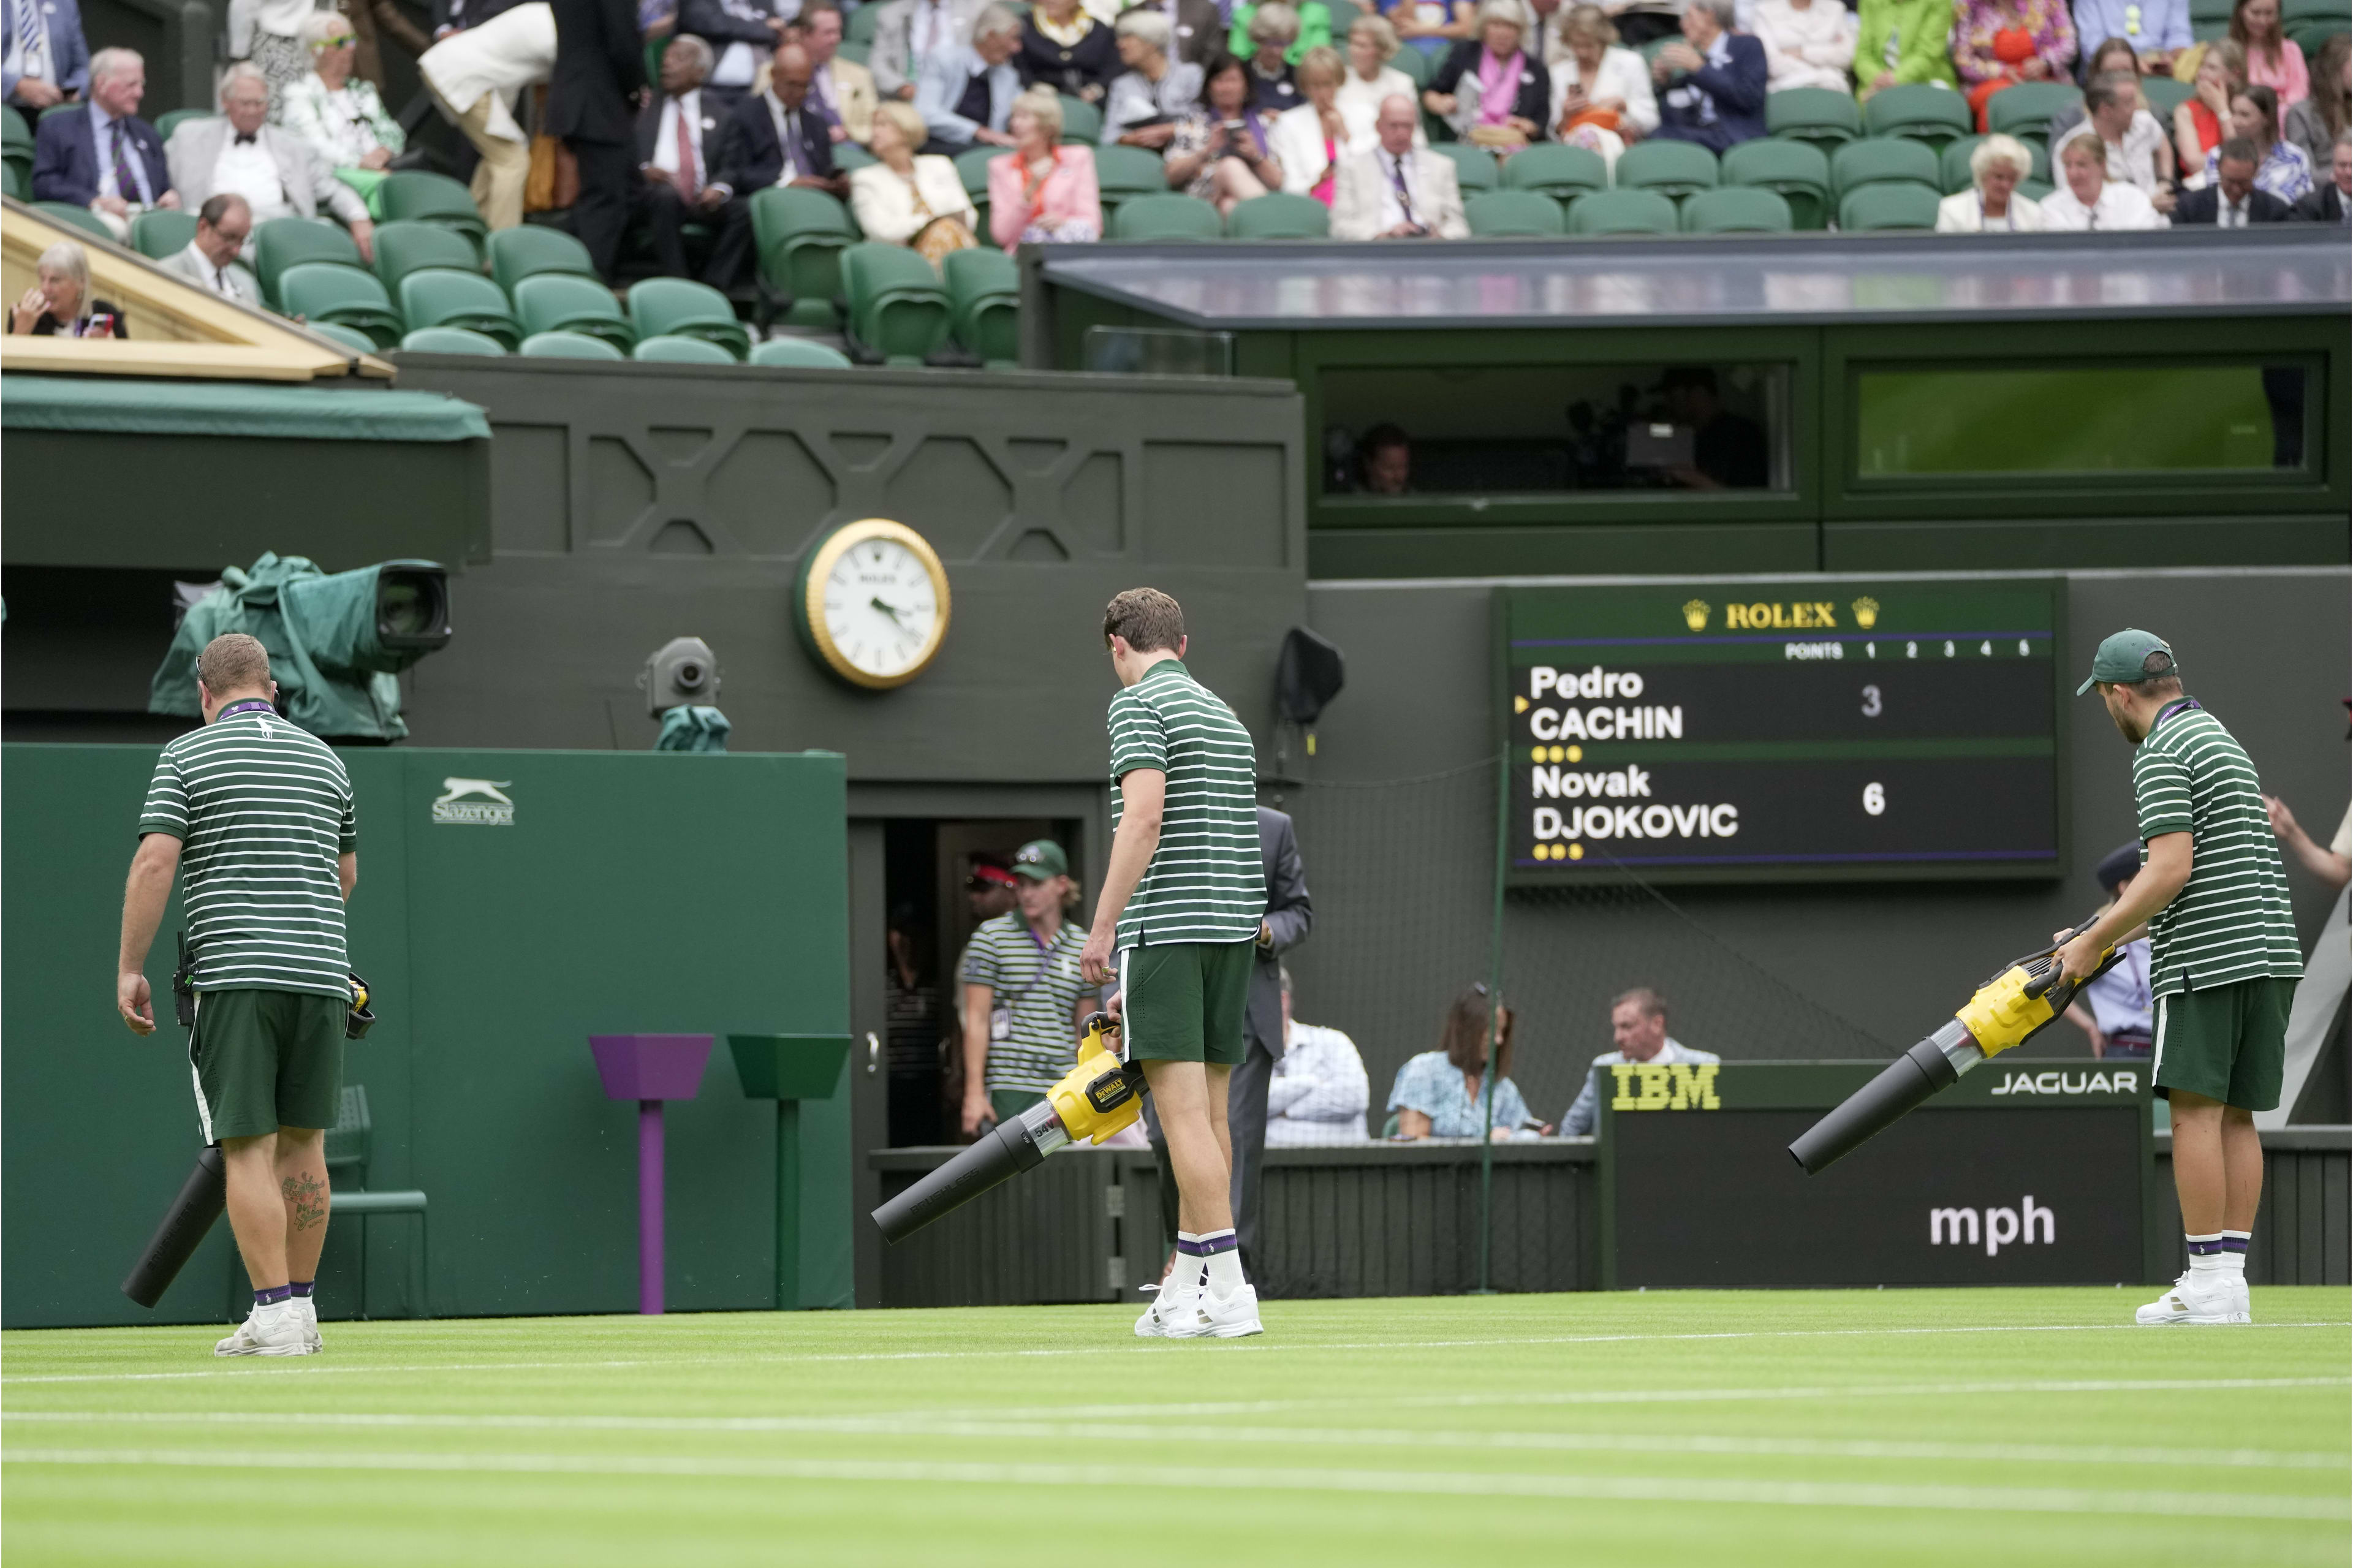 Wimbledon uses leaf blowers to dry the grass on Centre Court after rain